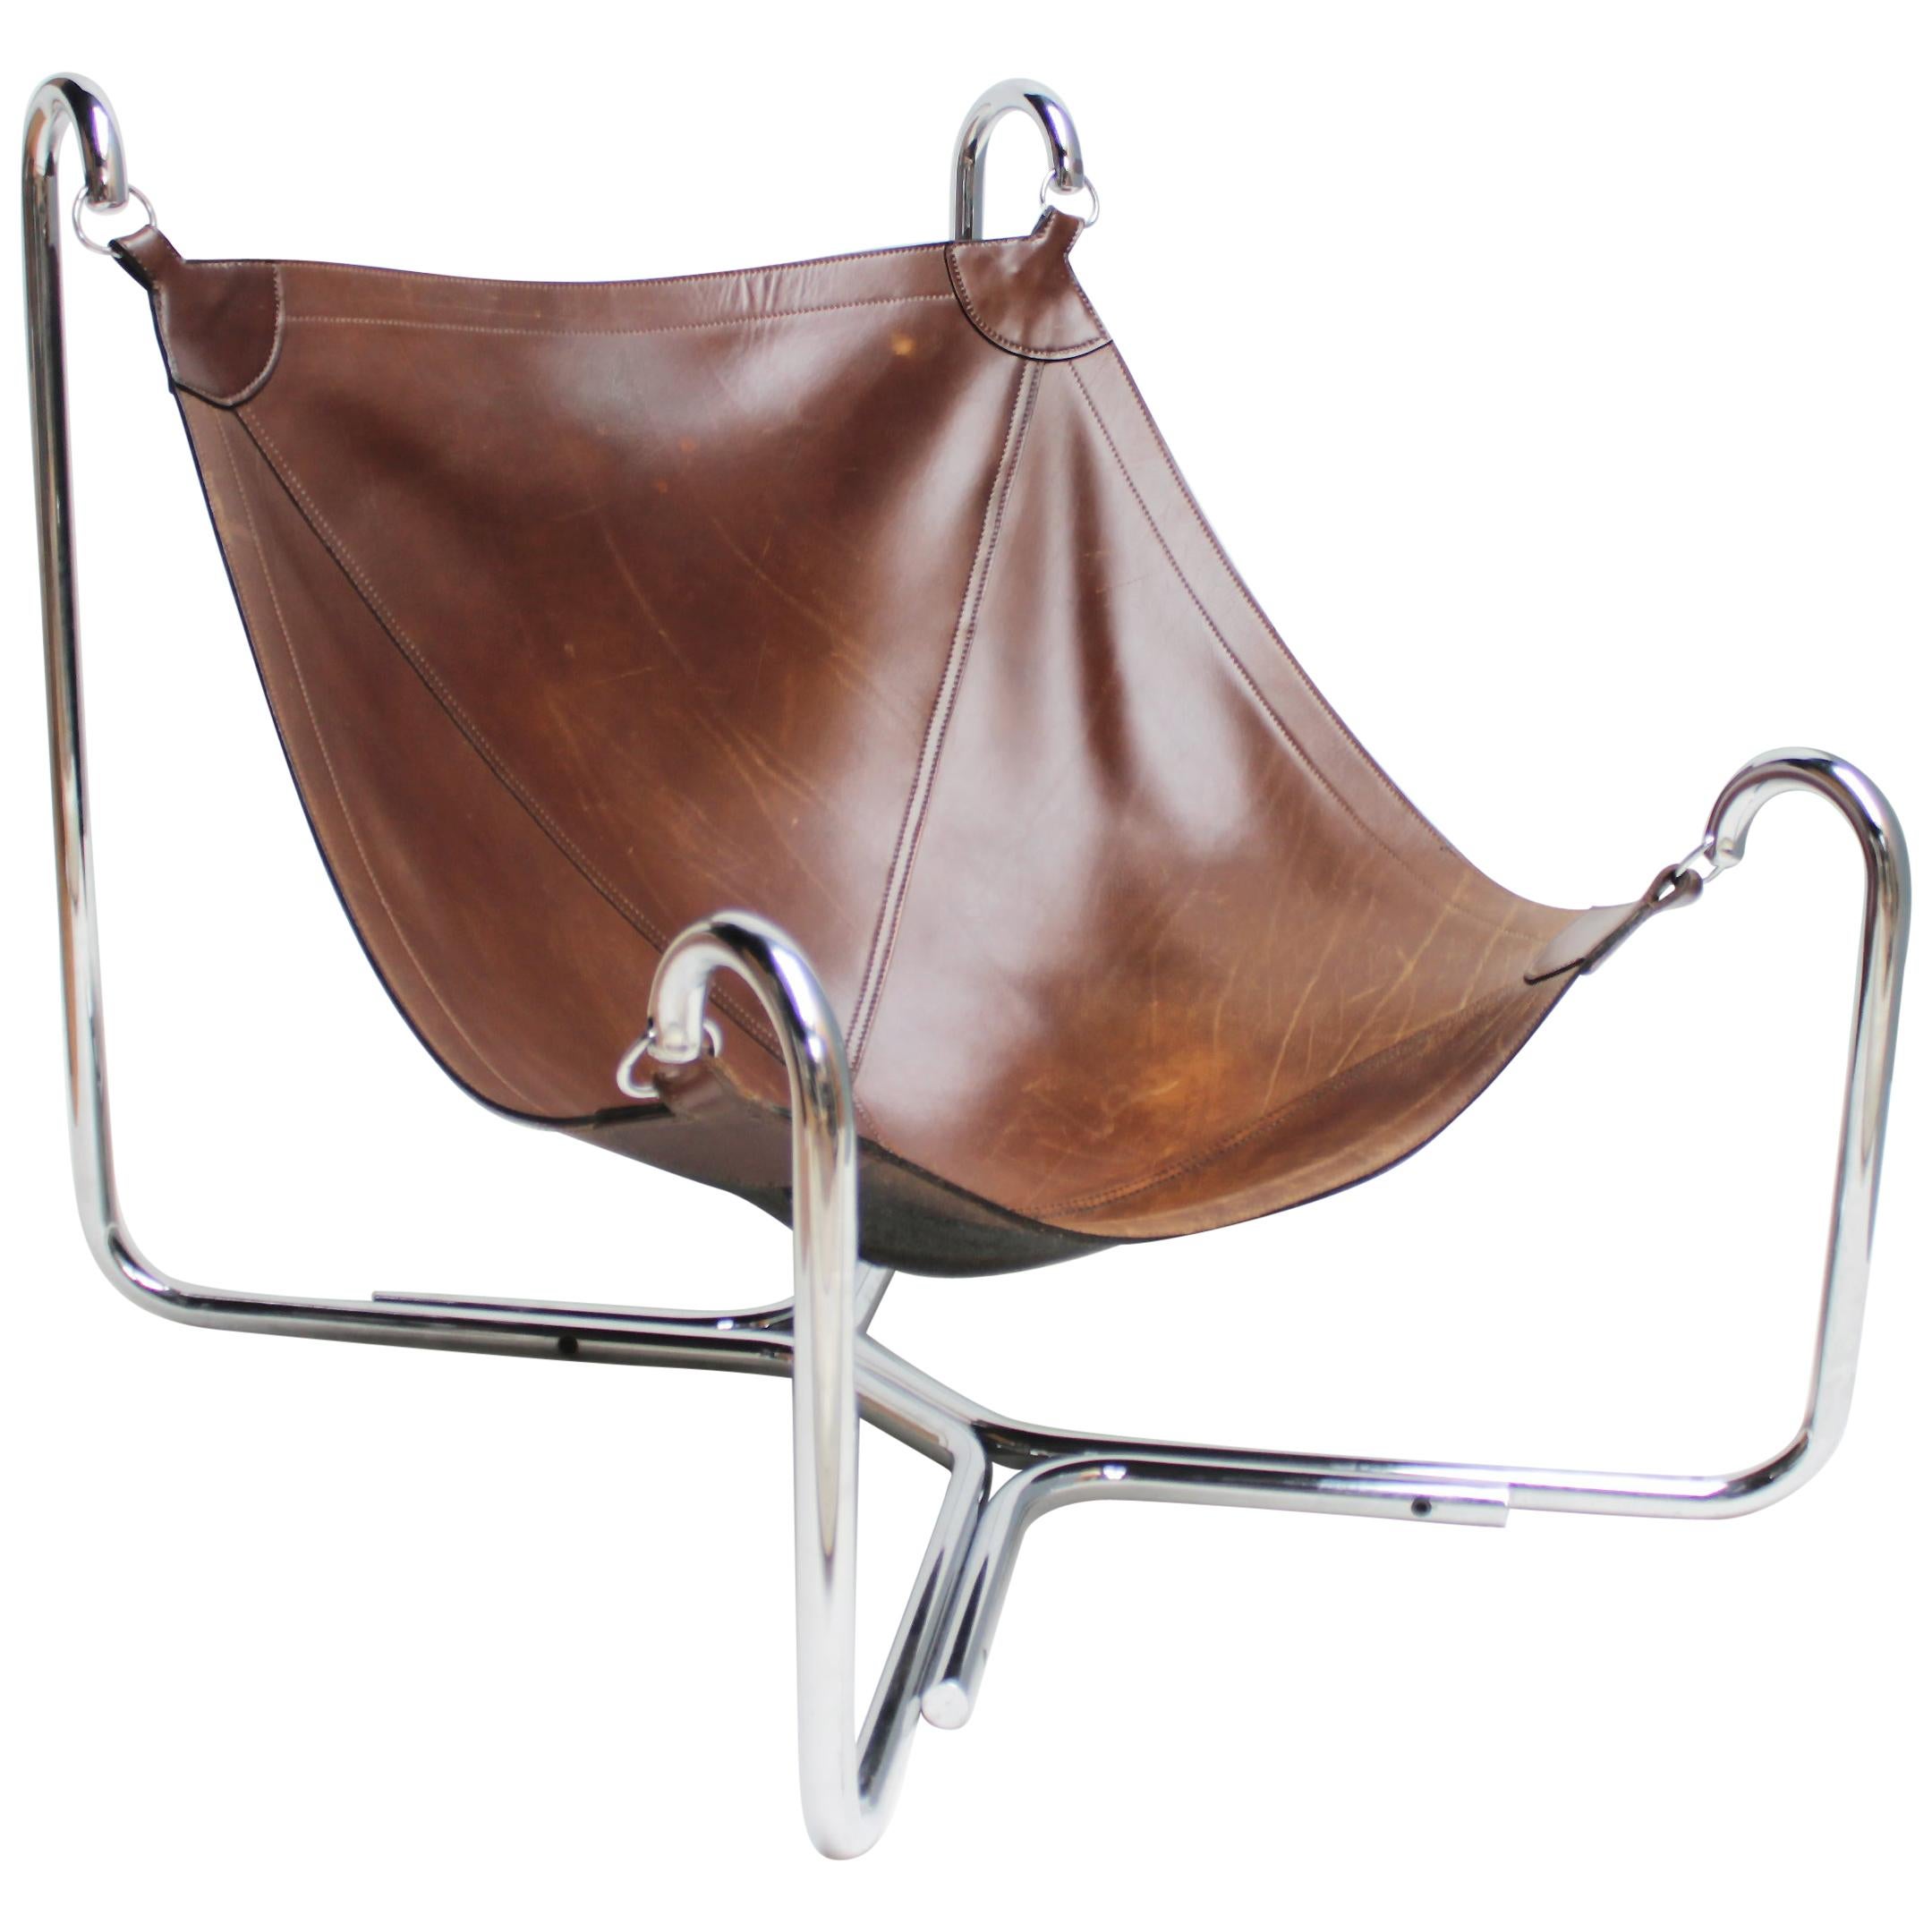 Baffo Lounge Chair by Didone and Pareschi for Busnelli